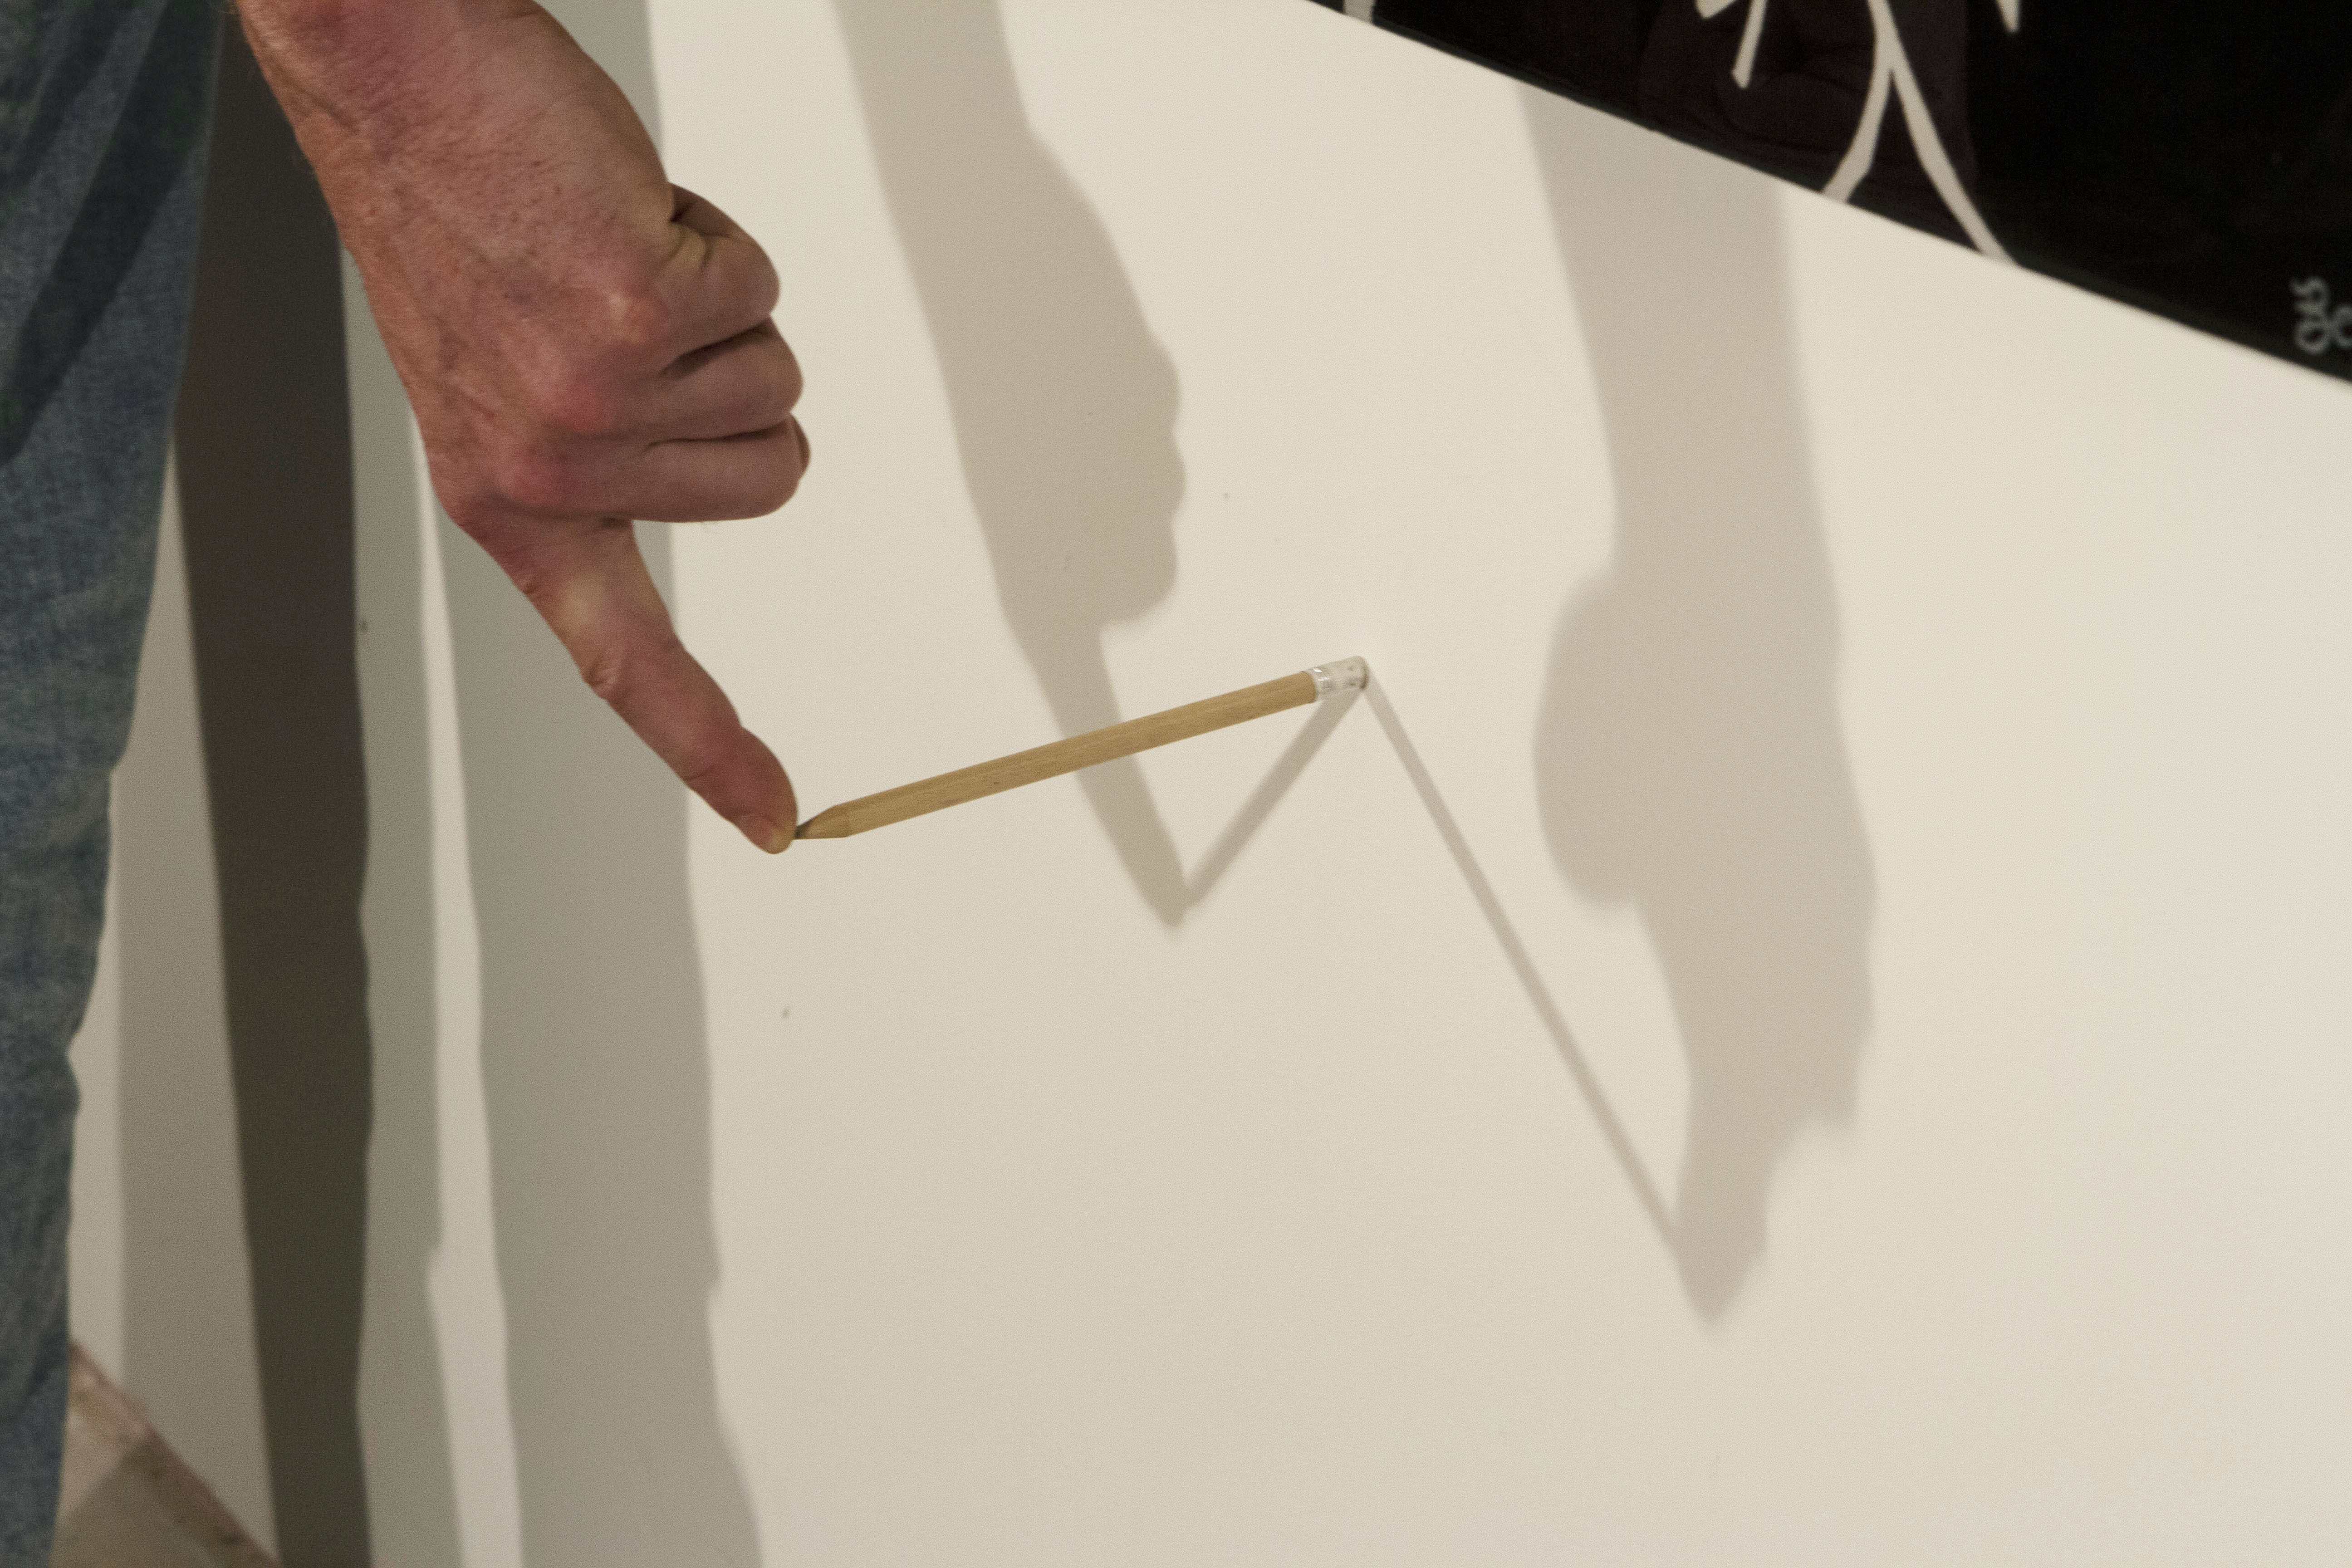 Photograph Your Resin Art Like A Pro - Geoff's simple pencil test to ensure the two side lights are evenly spaced